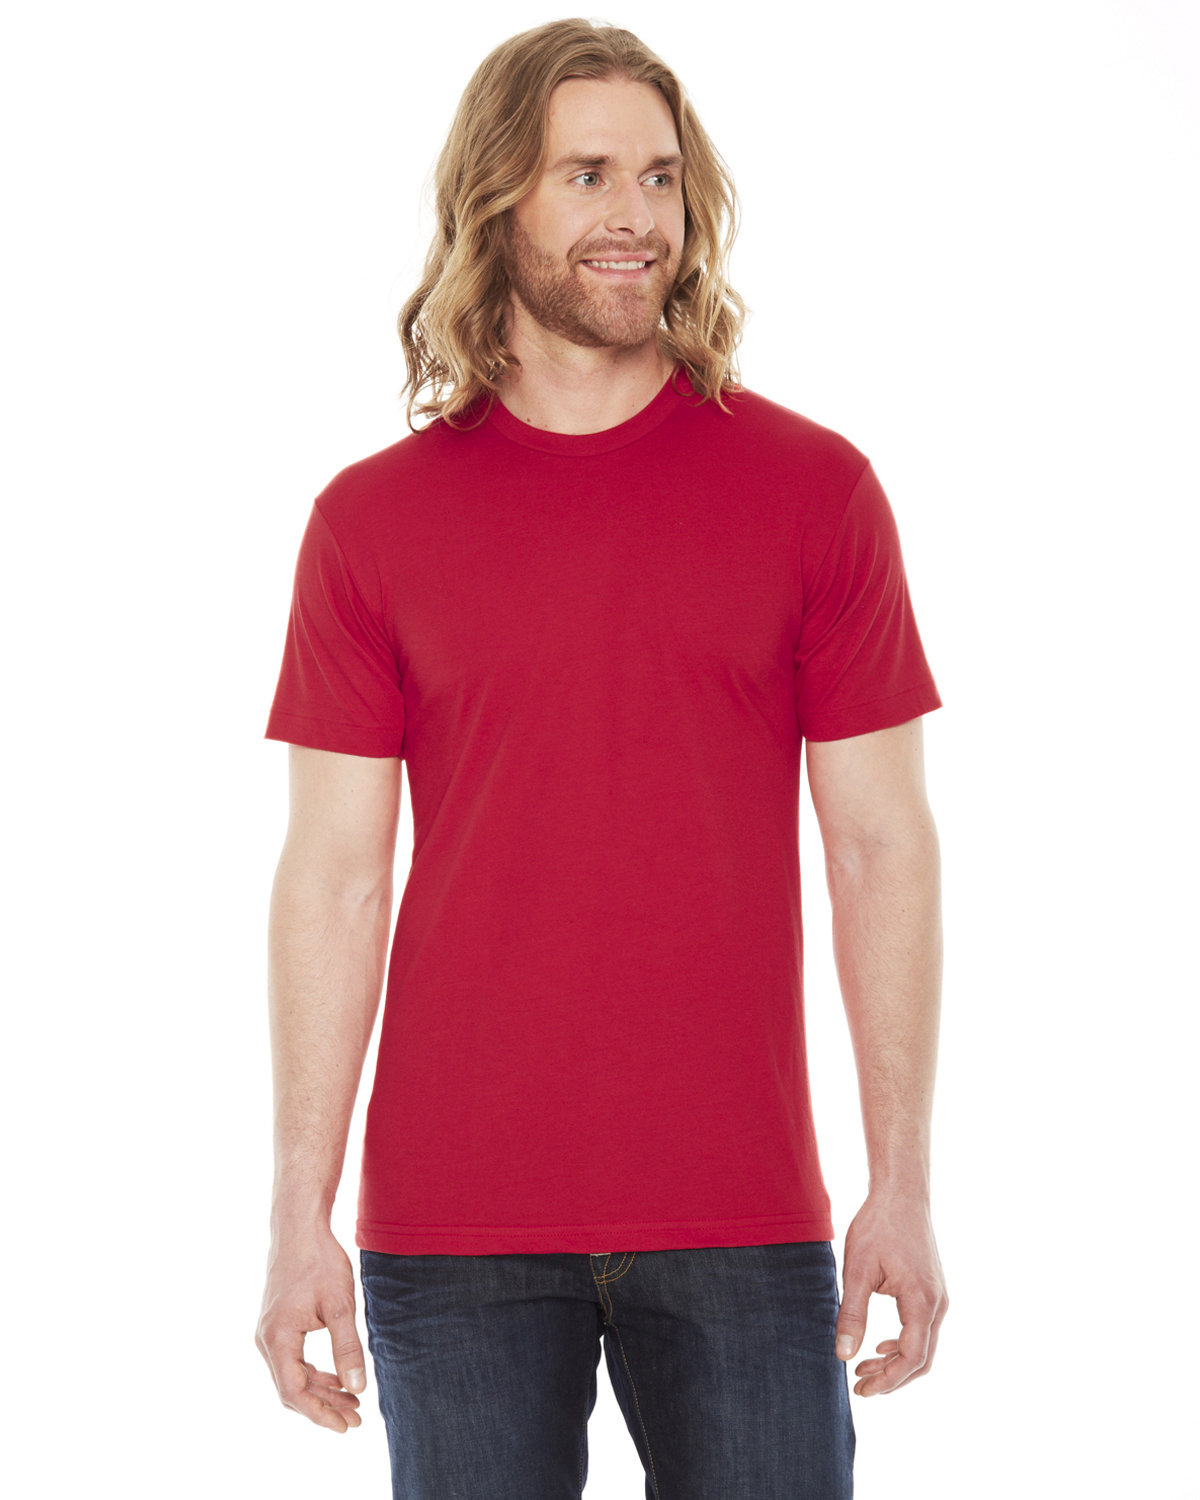 American Apparel Unisex Classic T-Shirt RED 